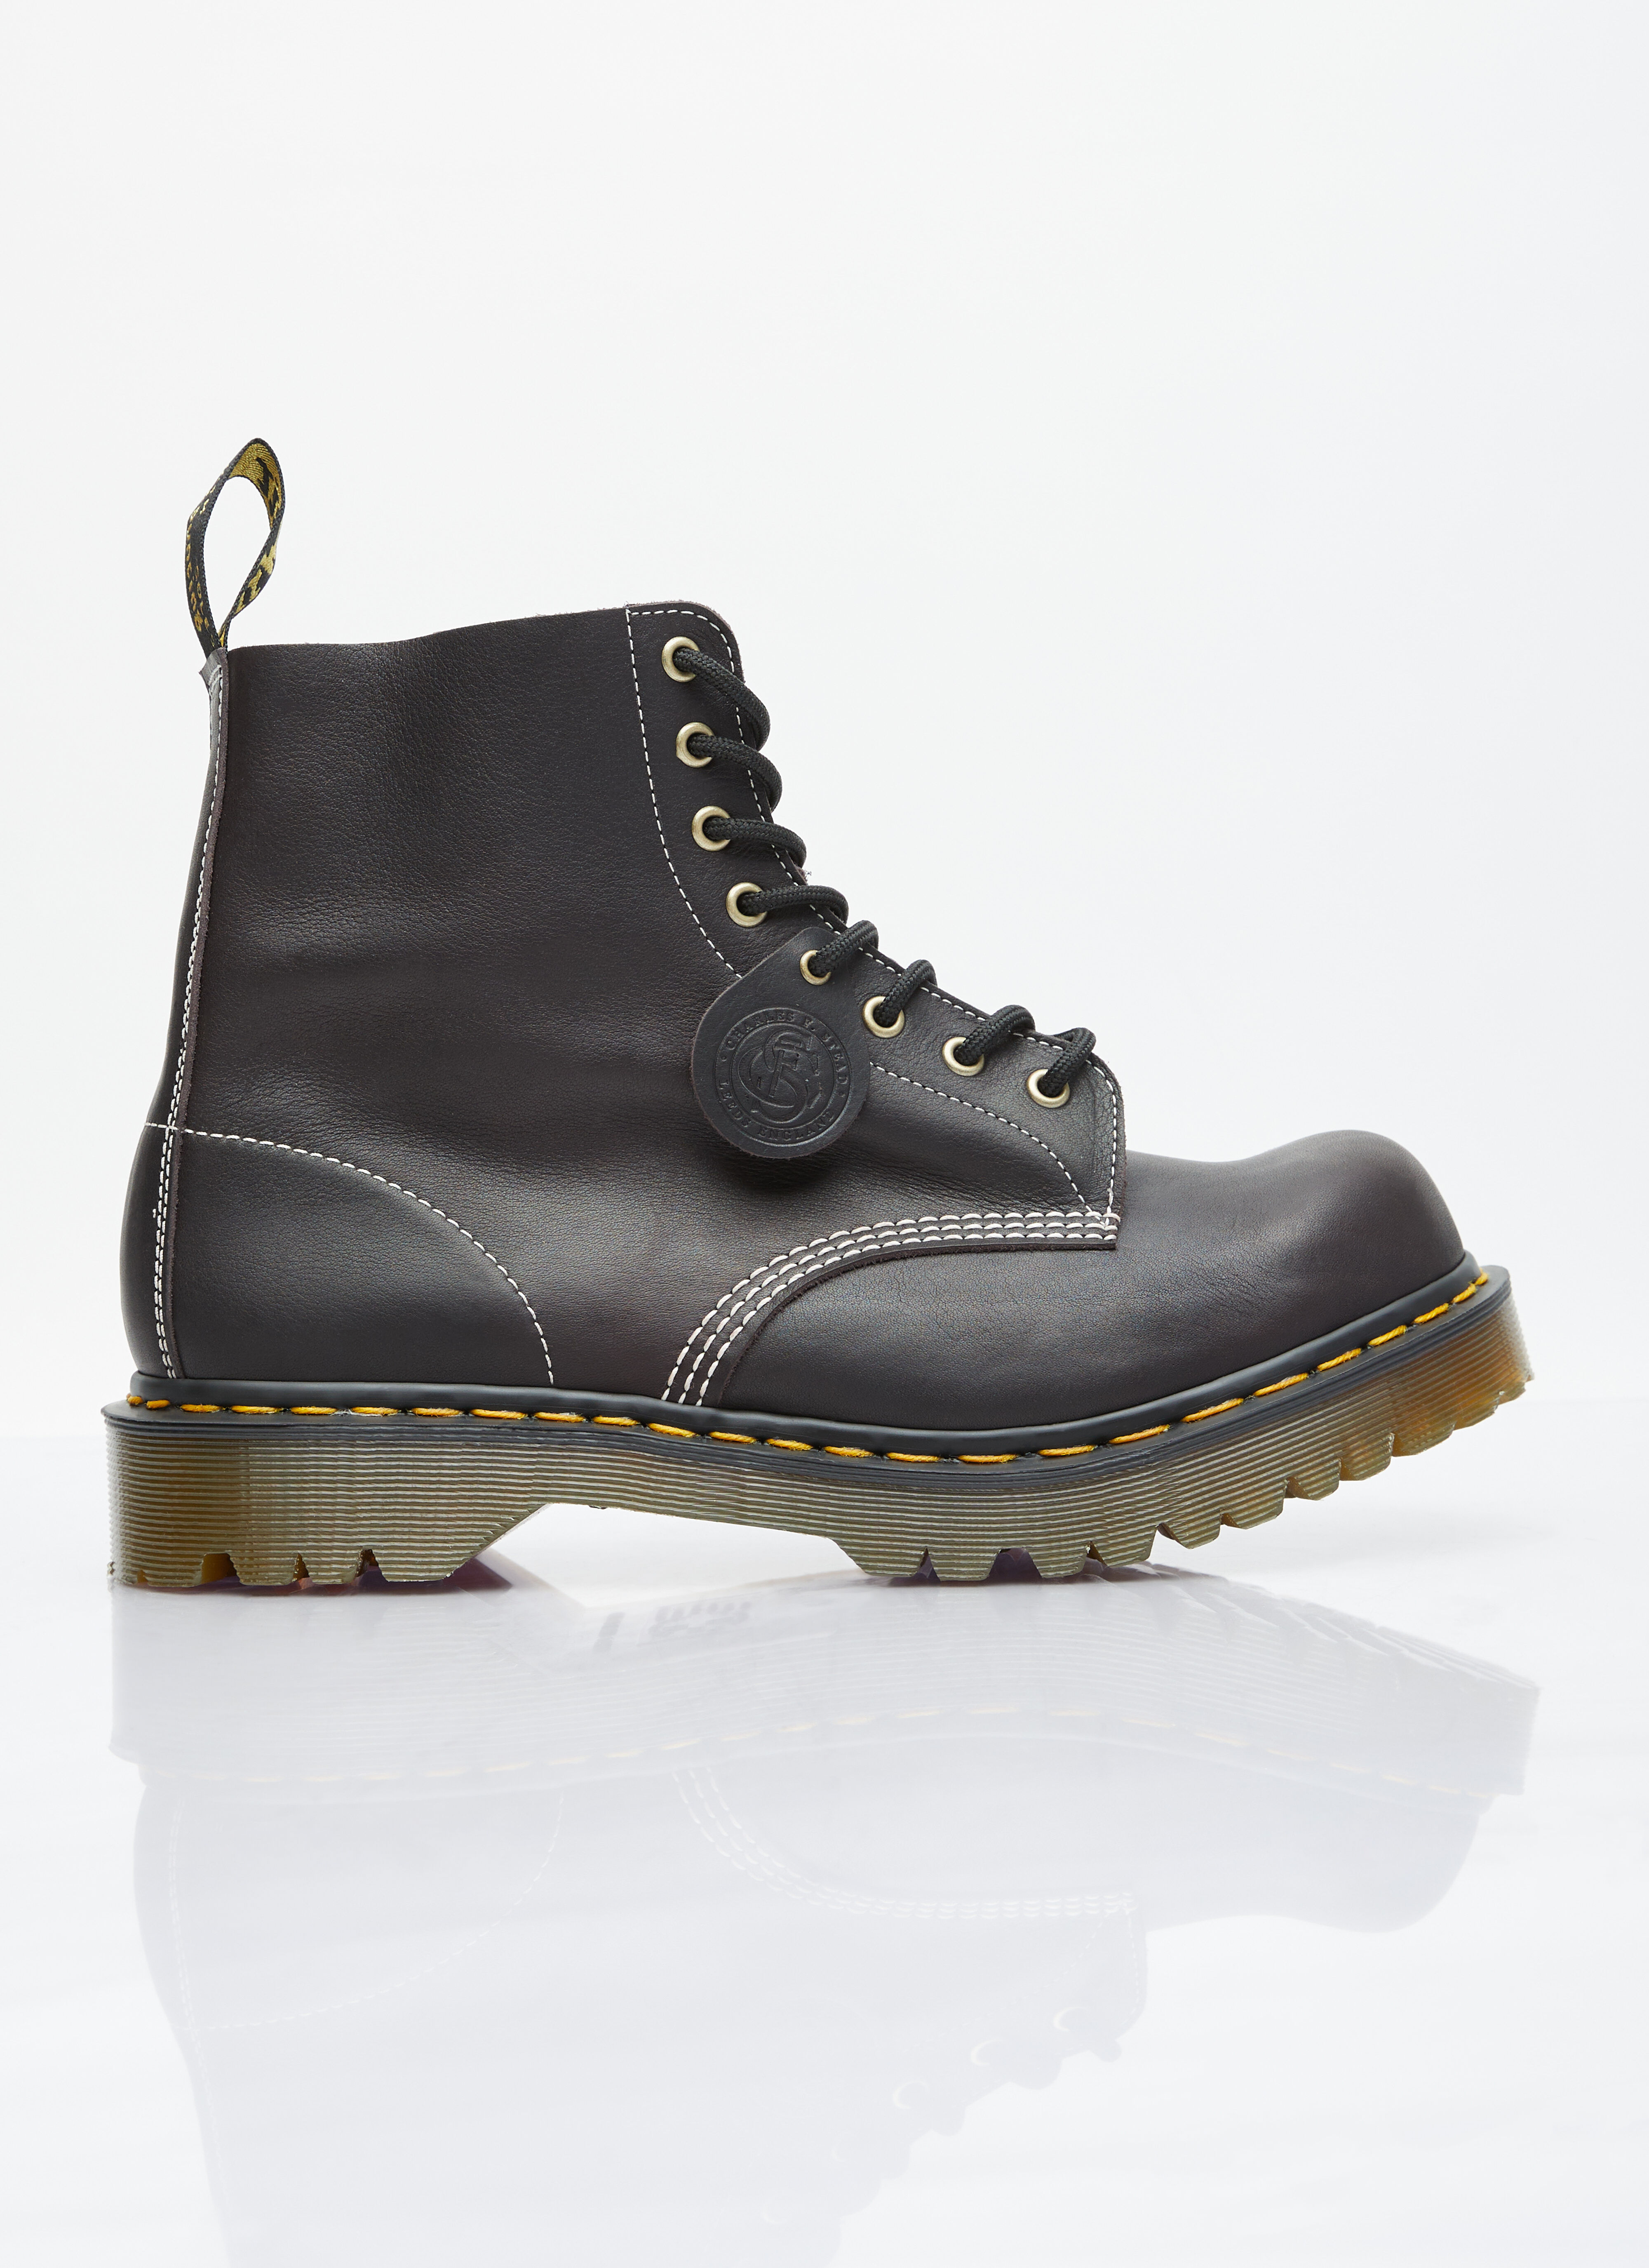 14XX BETA 1460 Pascal Leather Boots Black drm0355001